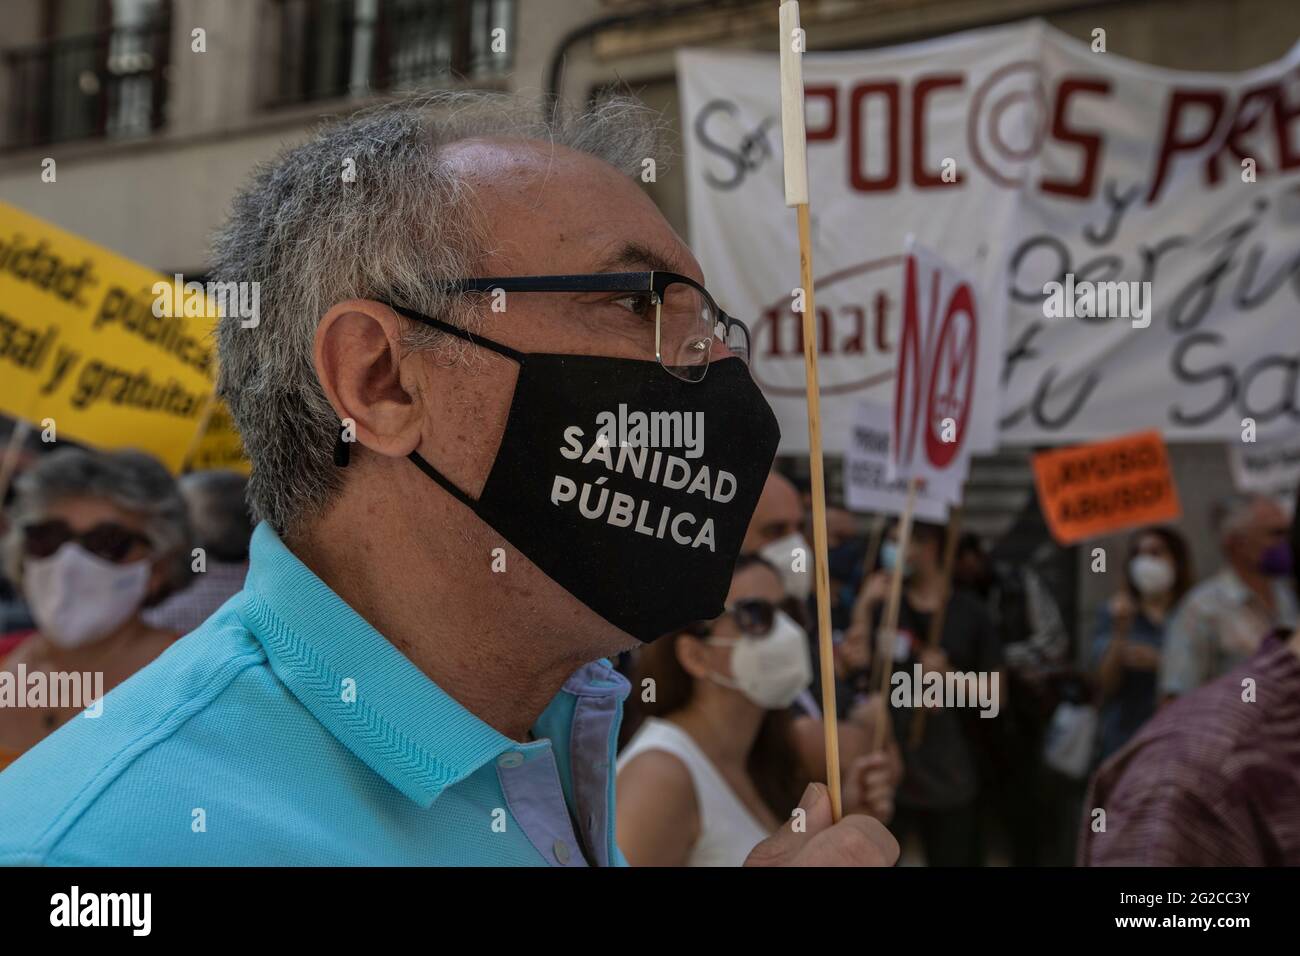 Madrid, Spain. 10th June, 2021. A protester wearing a facemask saying Public Health during the demonstration.A group of protesters gathered outside the Ministry of Health to demonstrate against the closures of health centres and primary care services. Credit: SOPA Images Limited/Alamy Live News Stock Photo